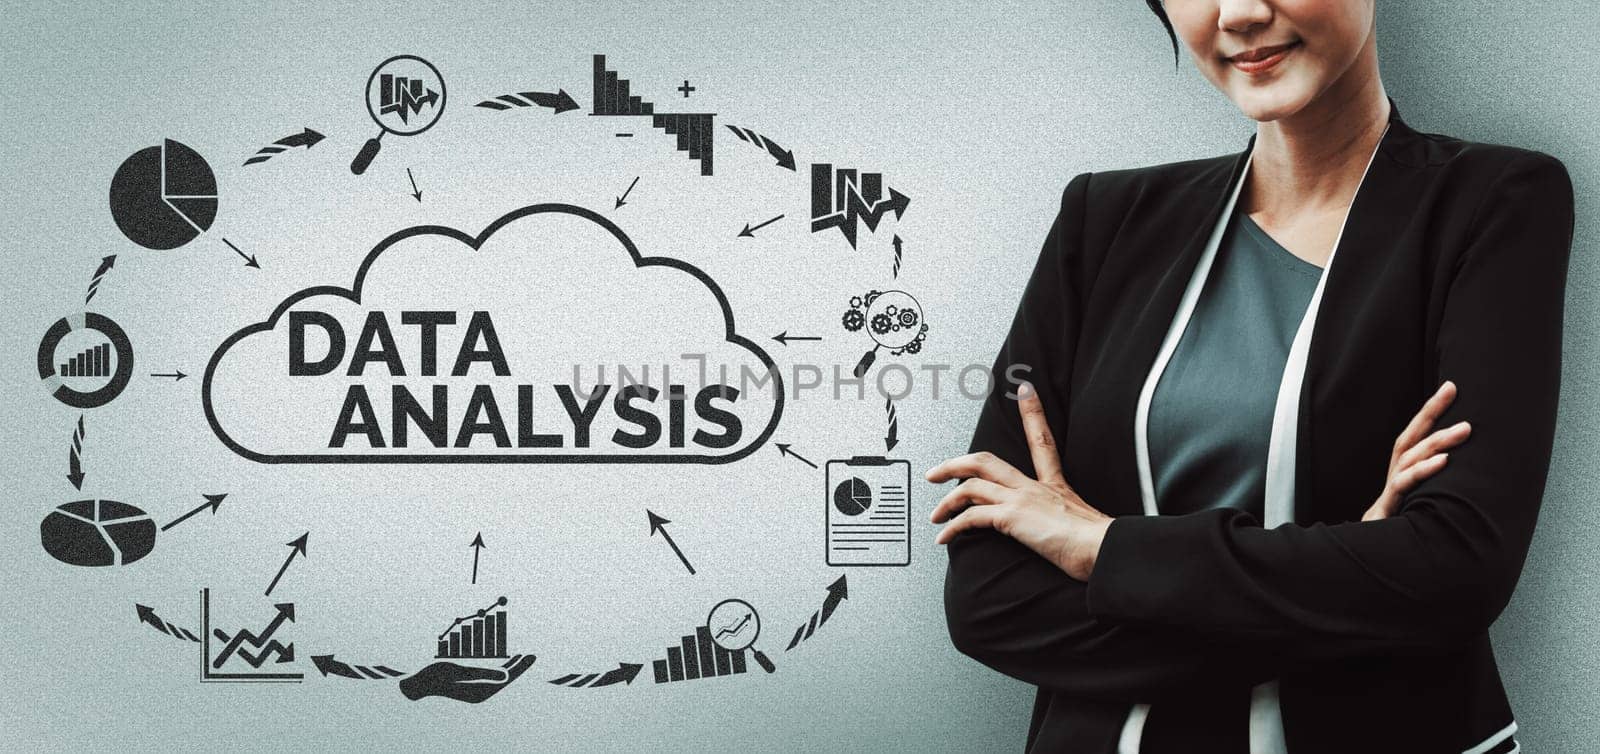 Data Analysis for Business and Finance Concept. interface showing future computer technology of profit analytic, online marketing research and information report for digital business strategy. uds